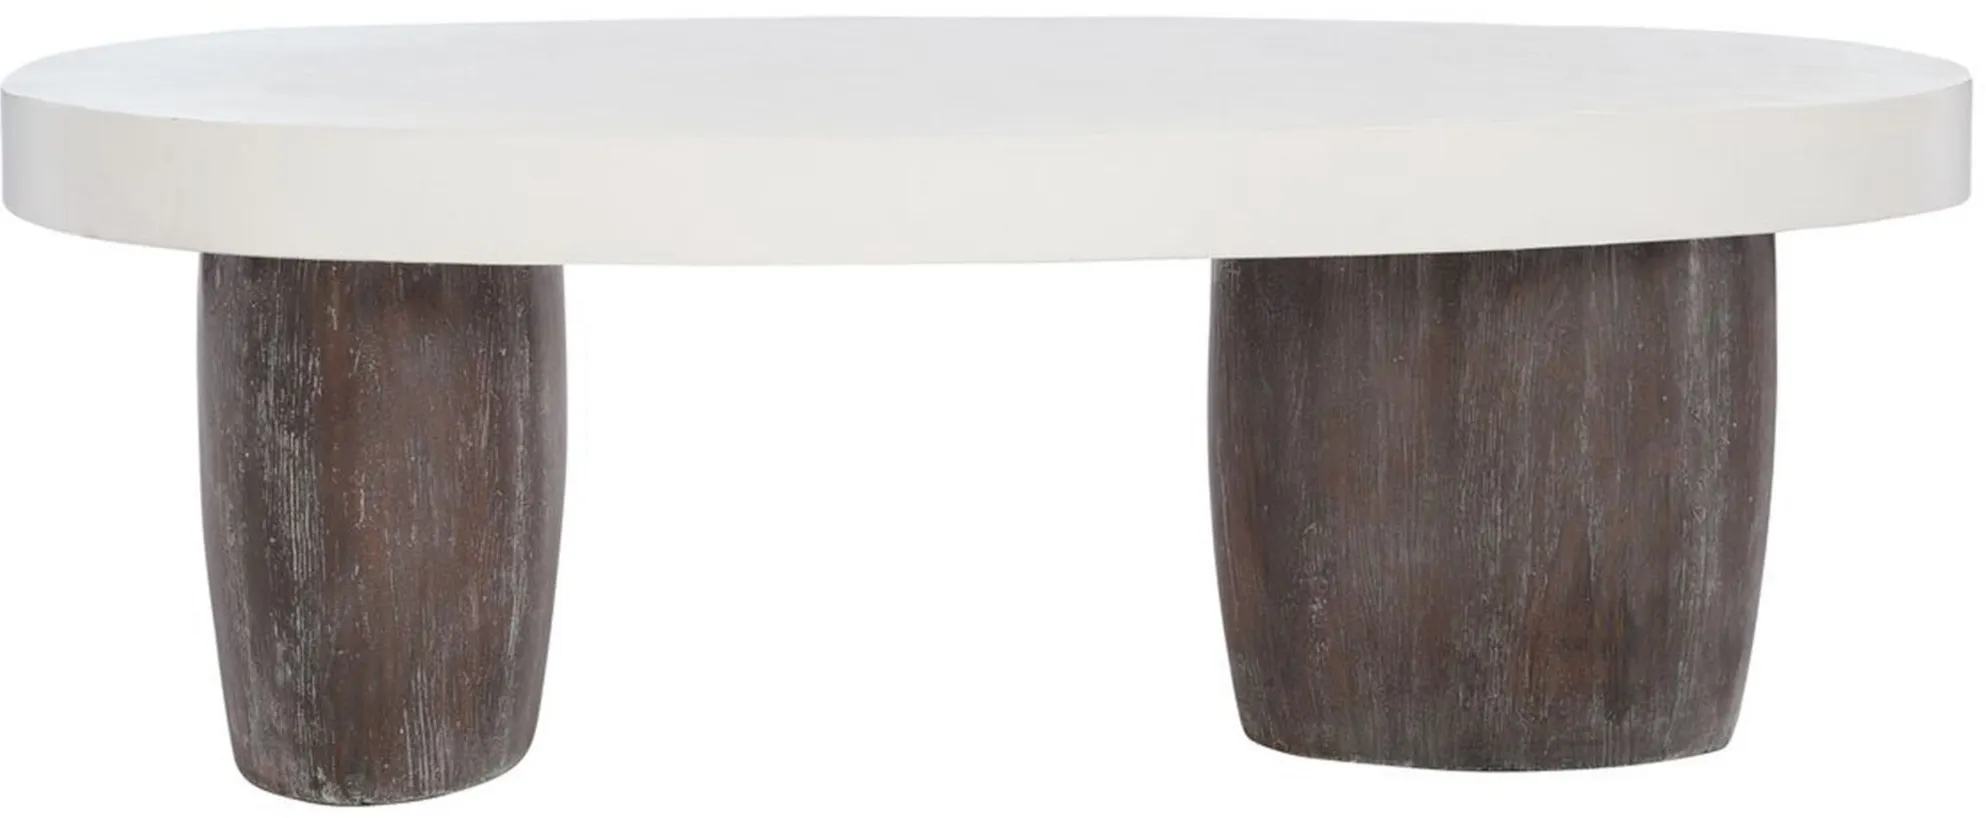 Woodward Cocktail Table in Bone Top/Brownstone Base by Bernhardt